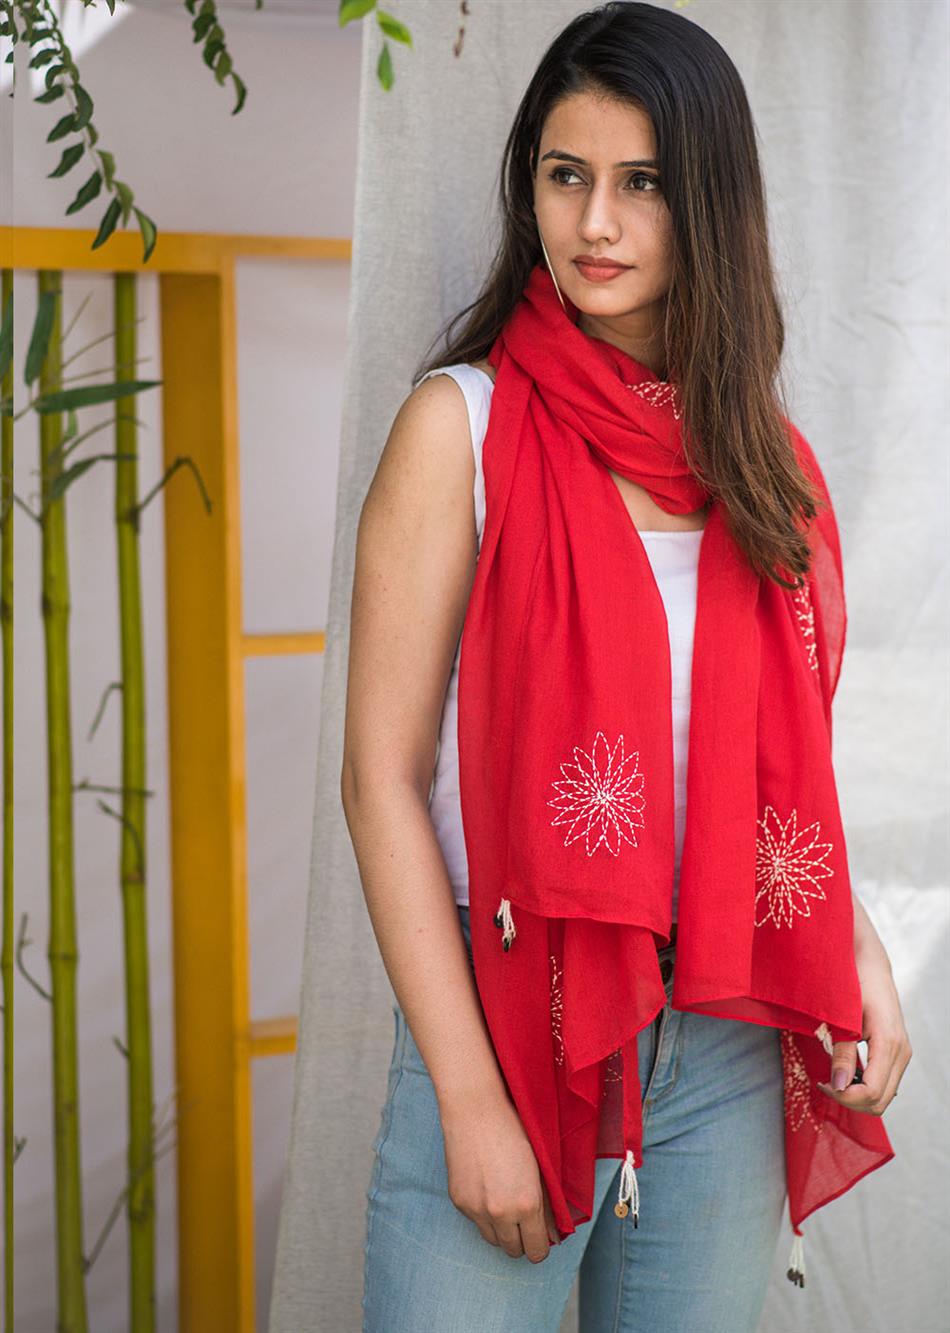 Balletic Mood - Red Hand Embroidered Scarf